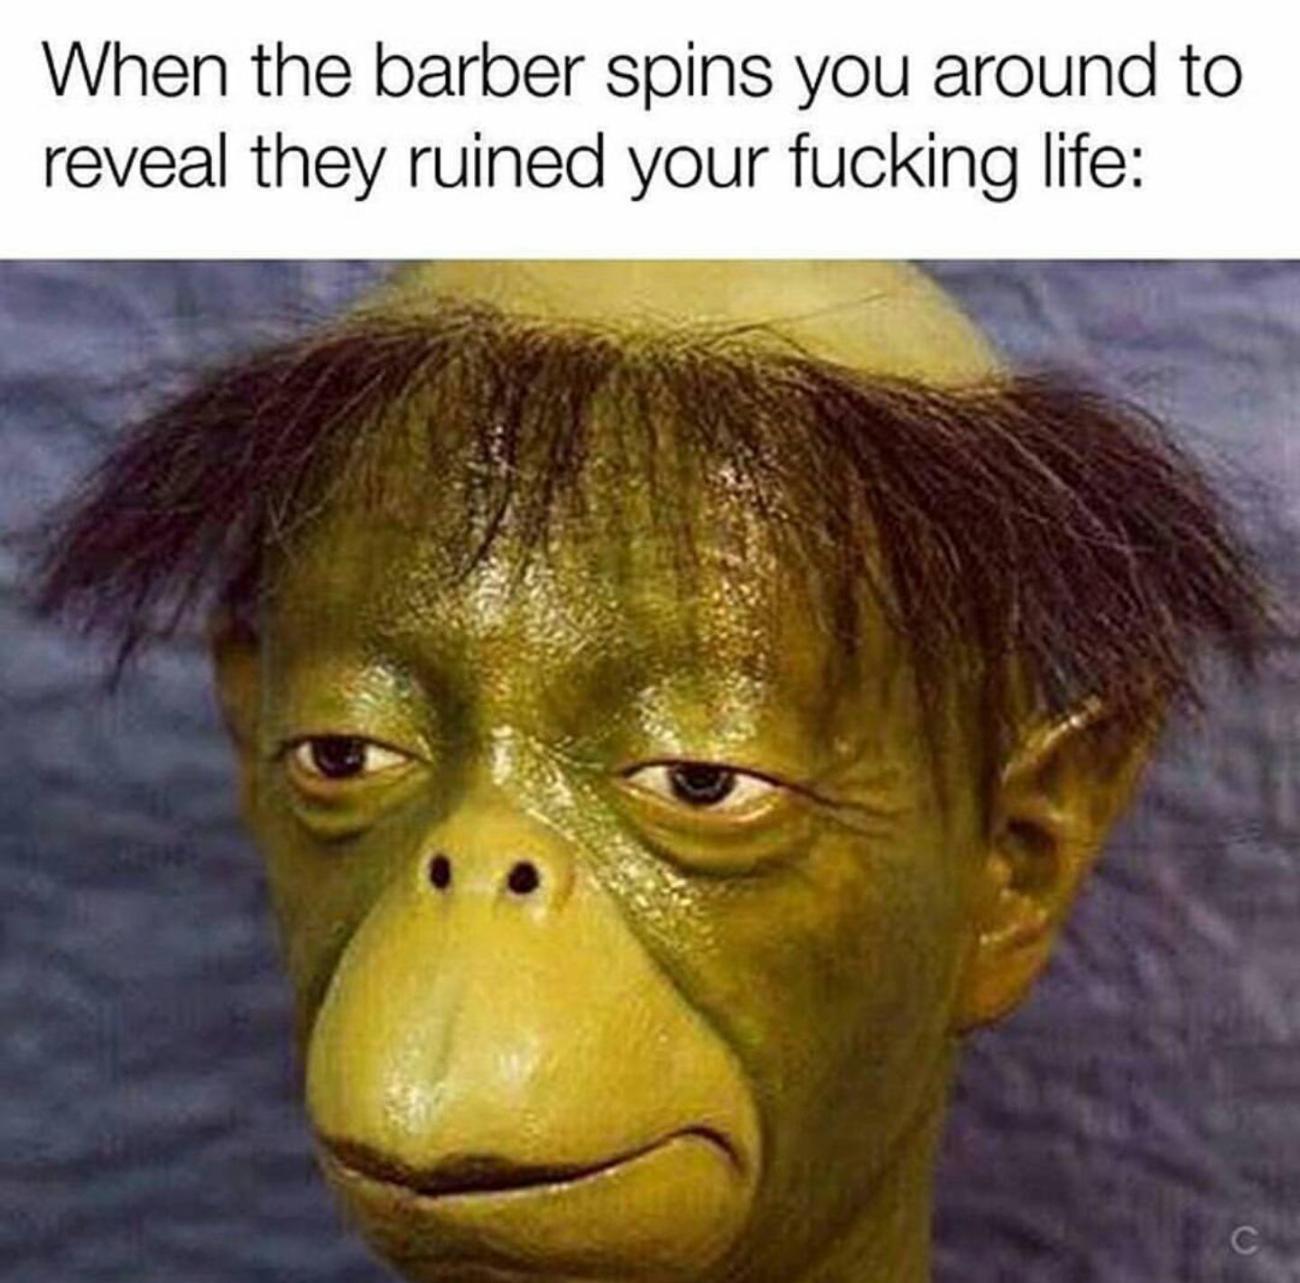 most random pictures on the internet - When the barber spins you around to reveal they ruined your fucking life